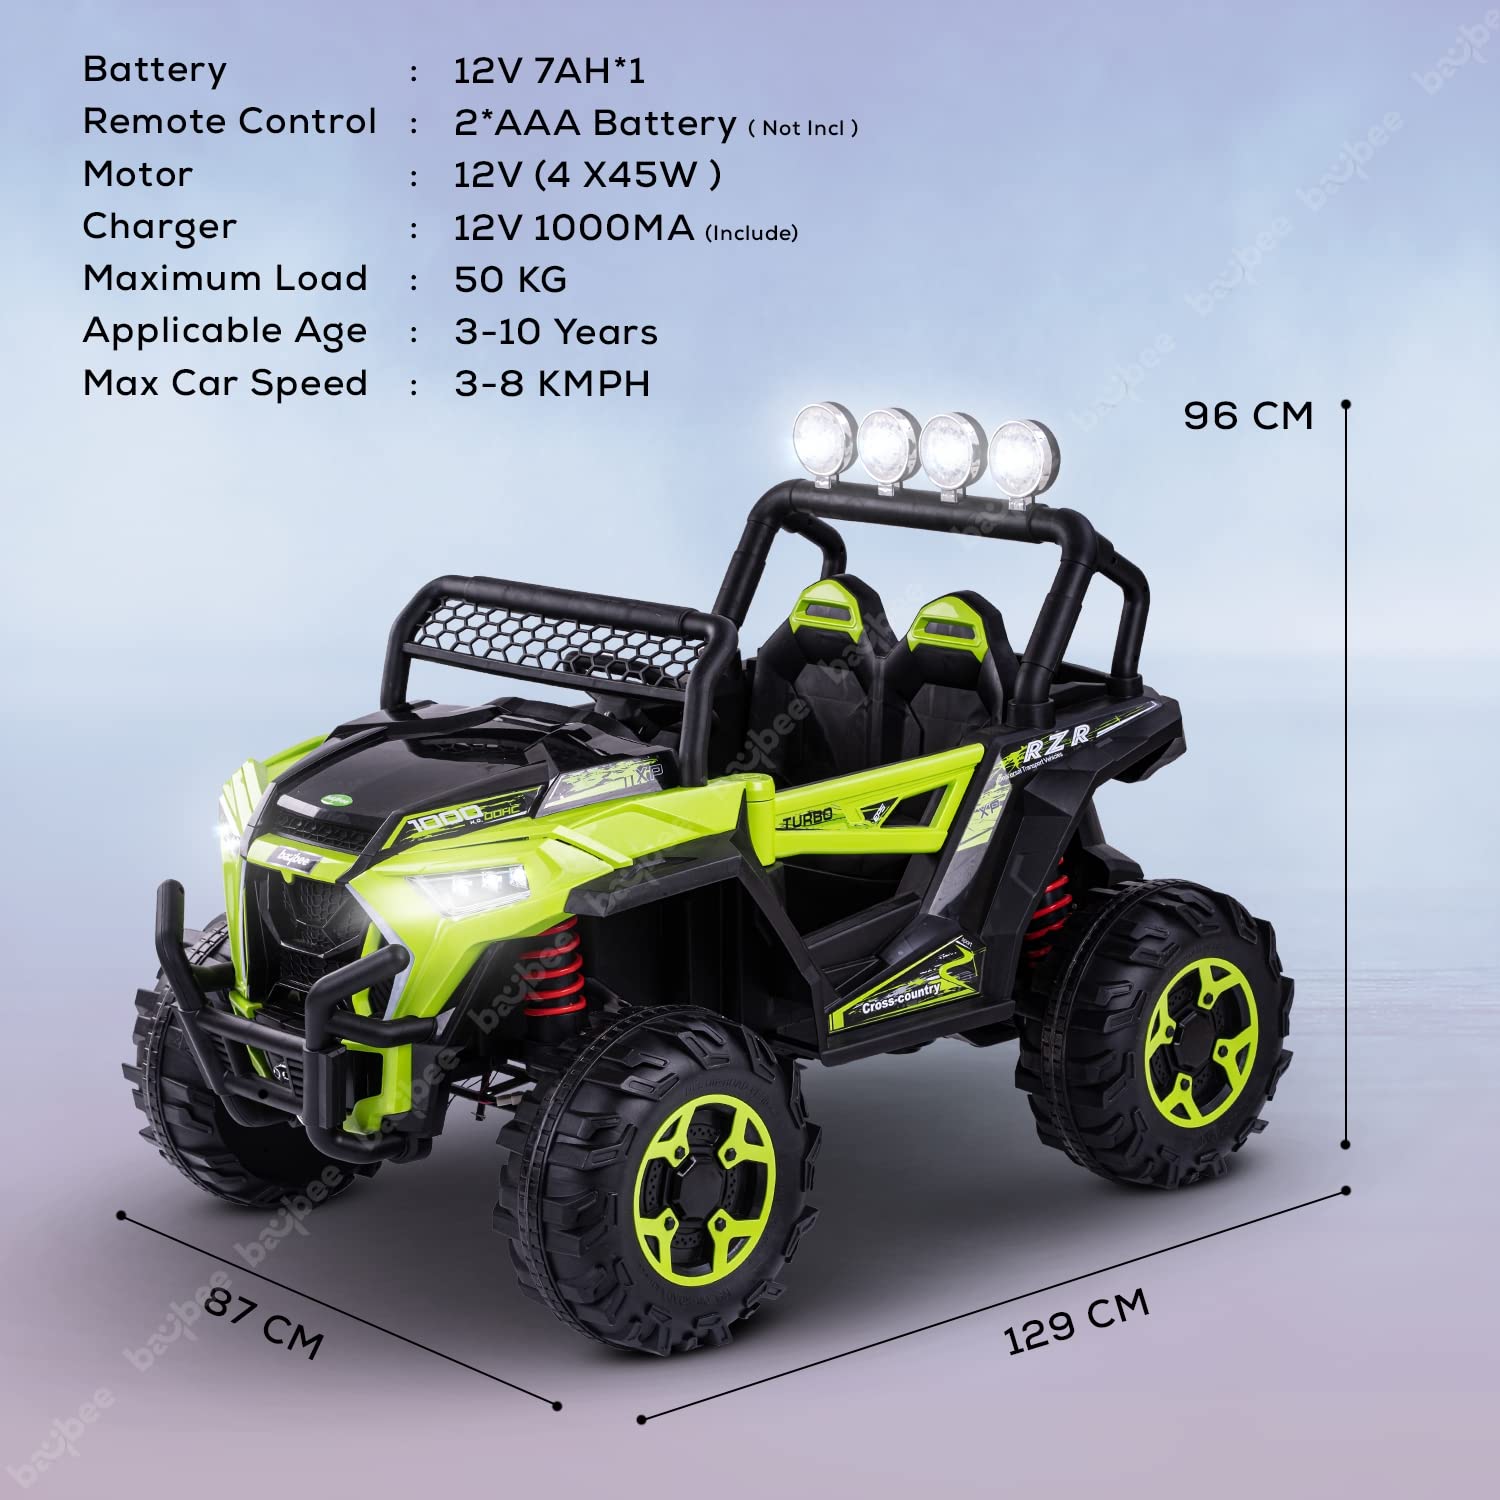 Minikin Wrath 4x4 Rechargeable Battery Operated Jeep I Large Size I 1 to 8 Years